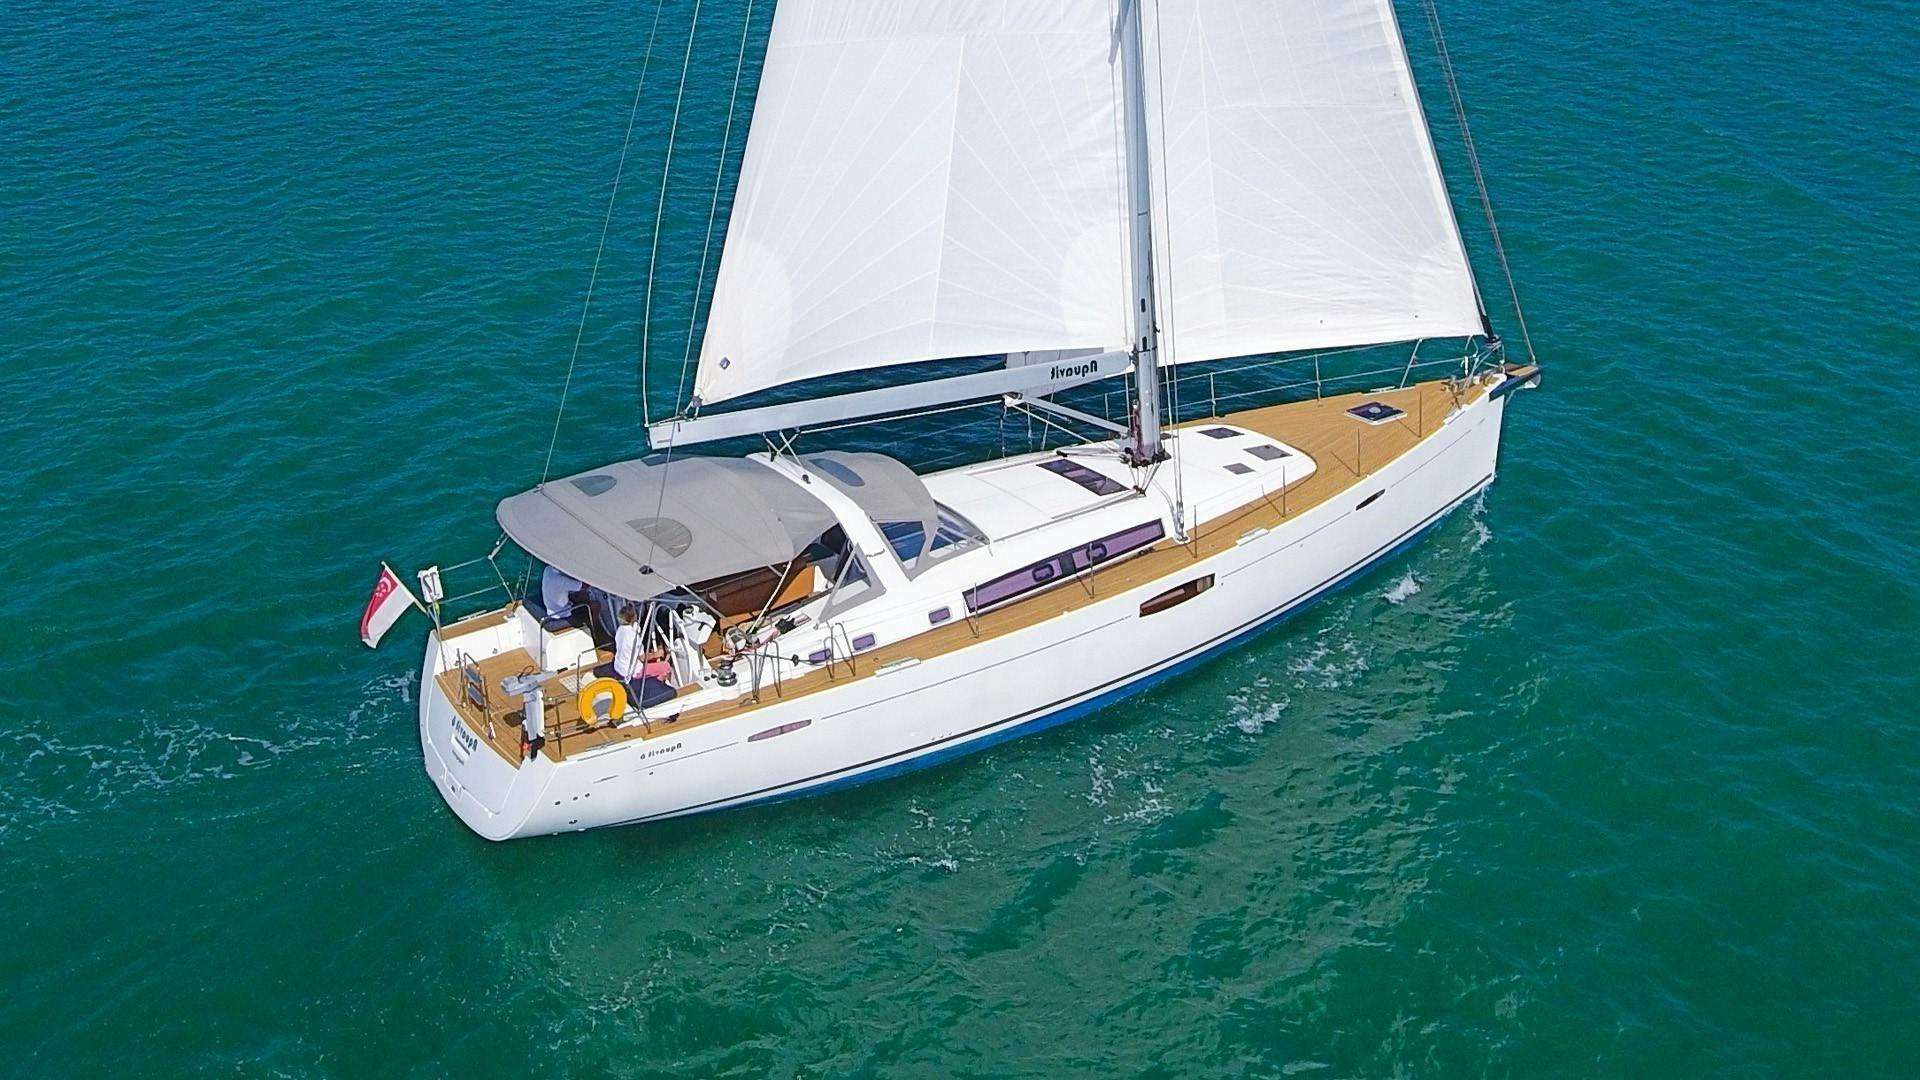 Watch Video for AQUAVIT VI Yacht for Sale